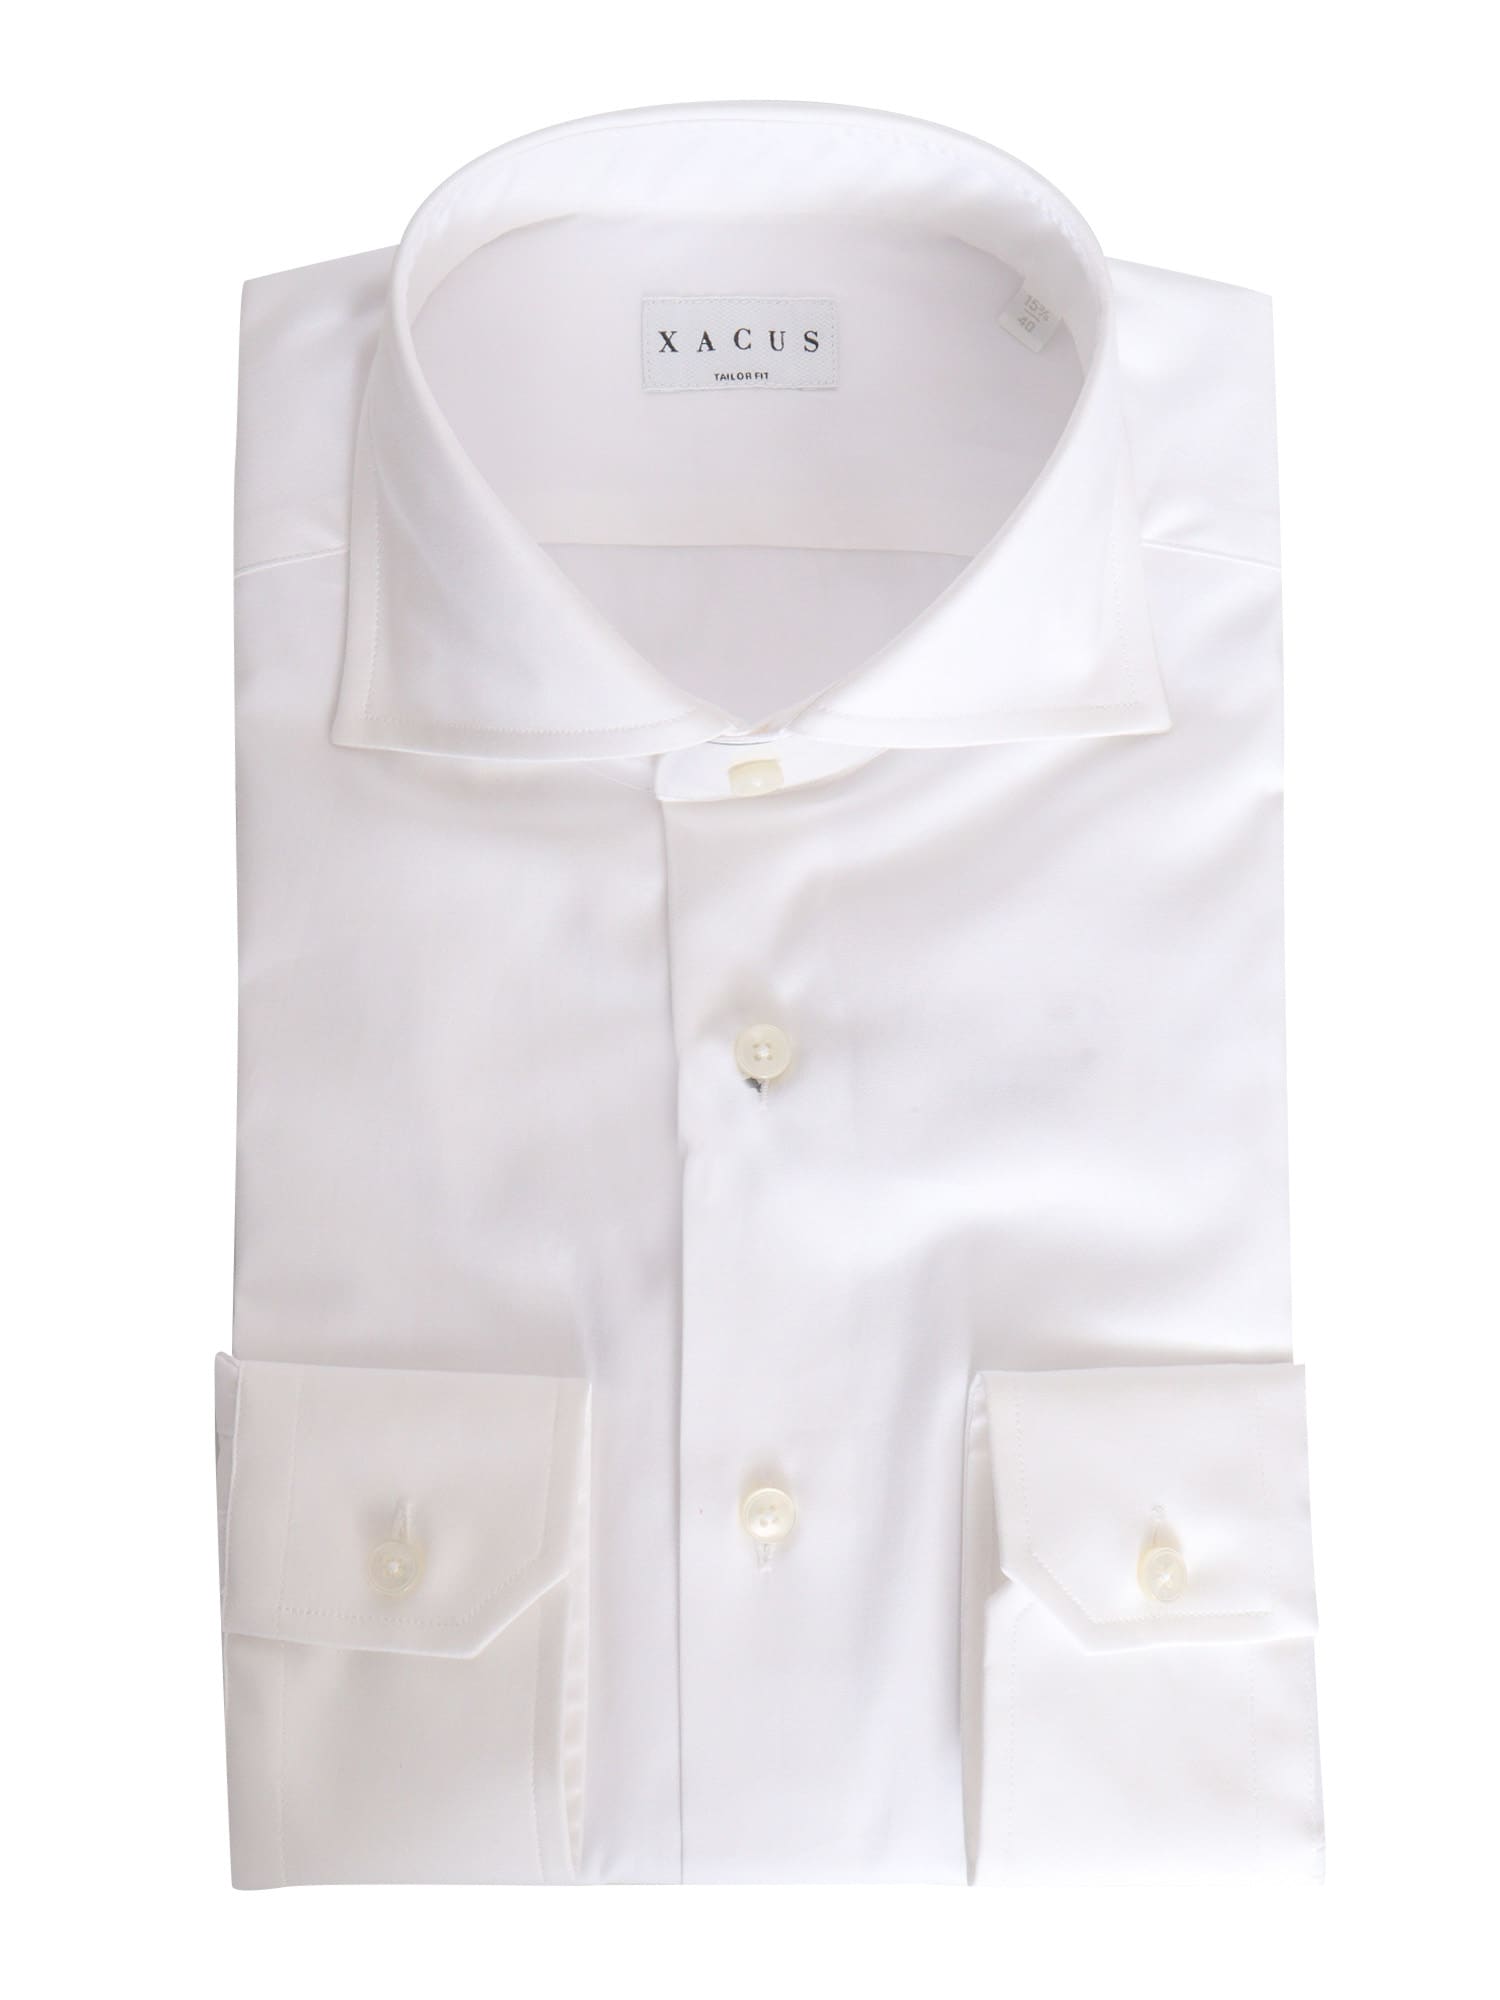 White Shirt With Pockets